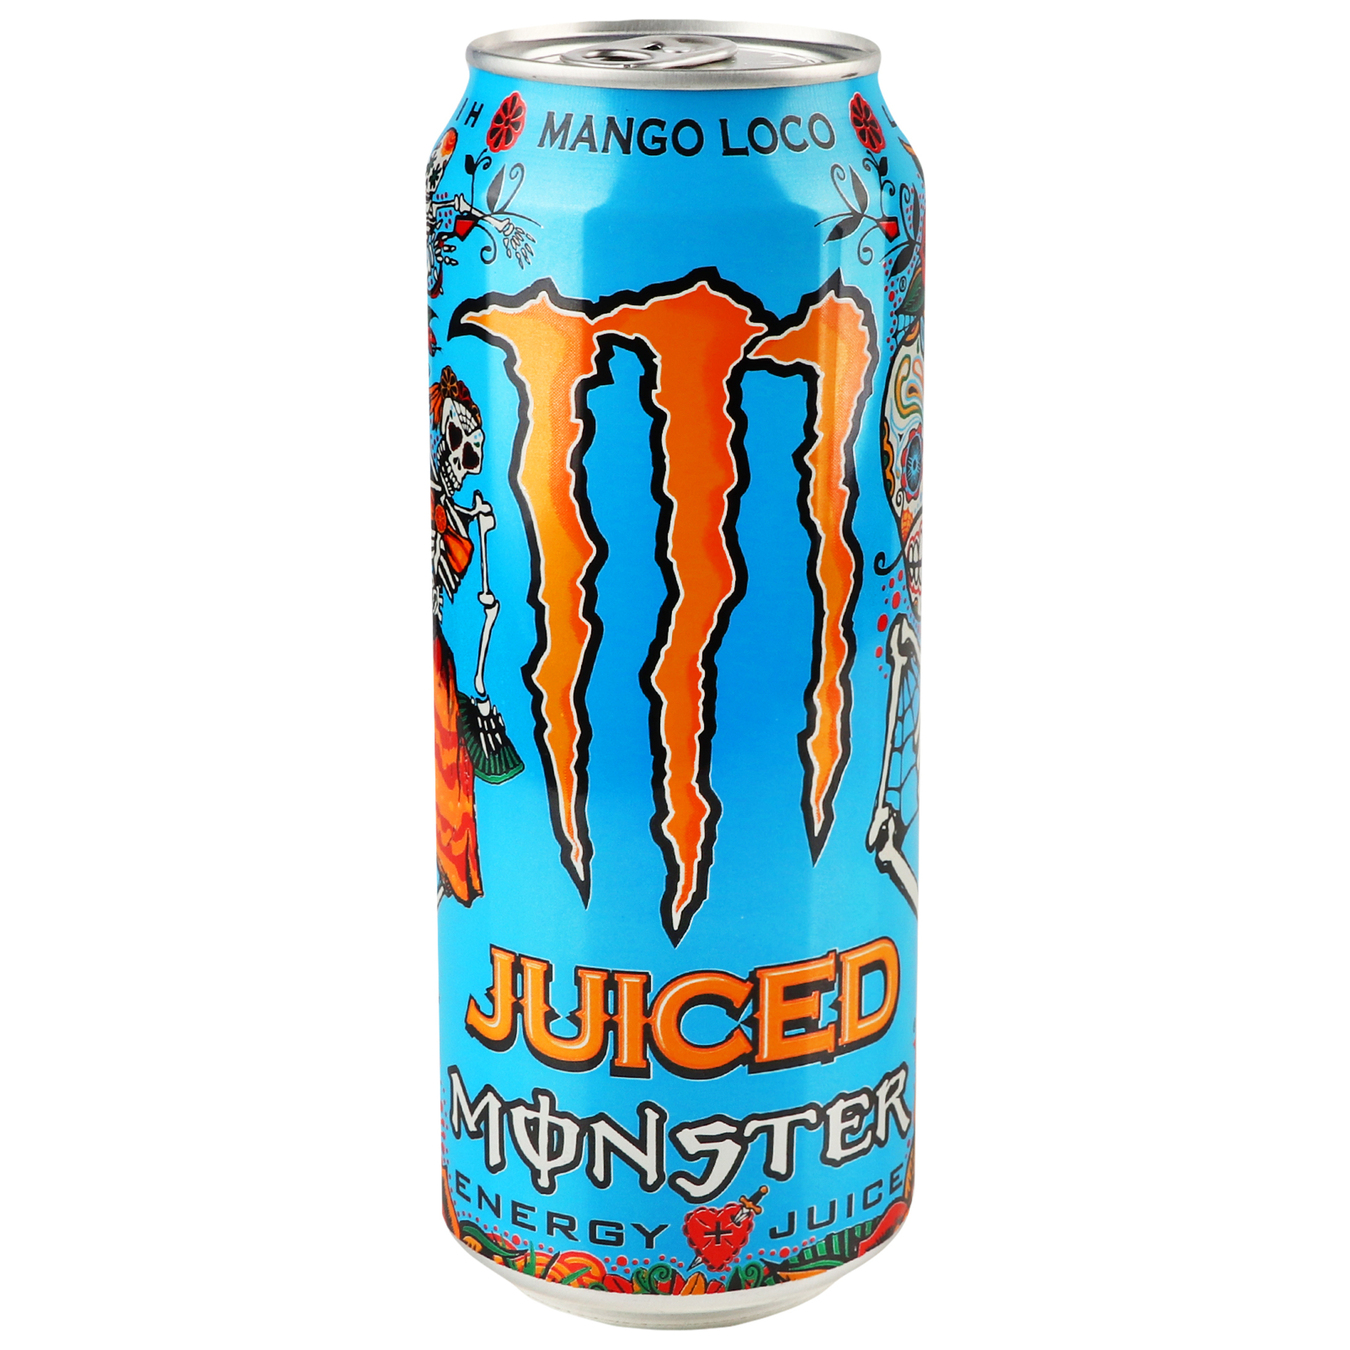 Energy drink Monster Energy Mango Loco 0.5 l iron can 2